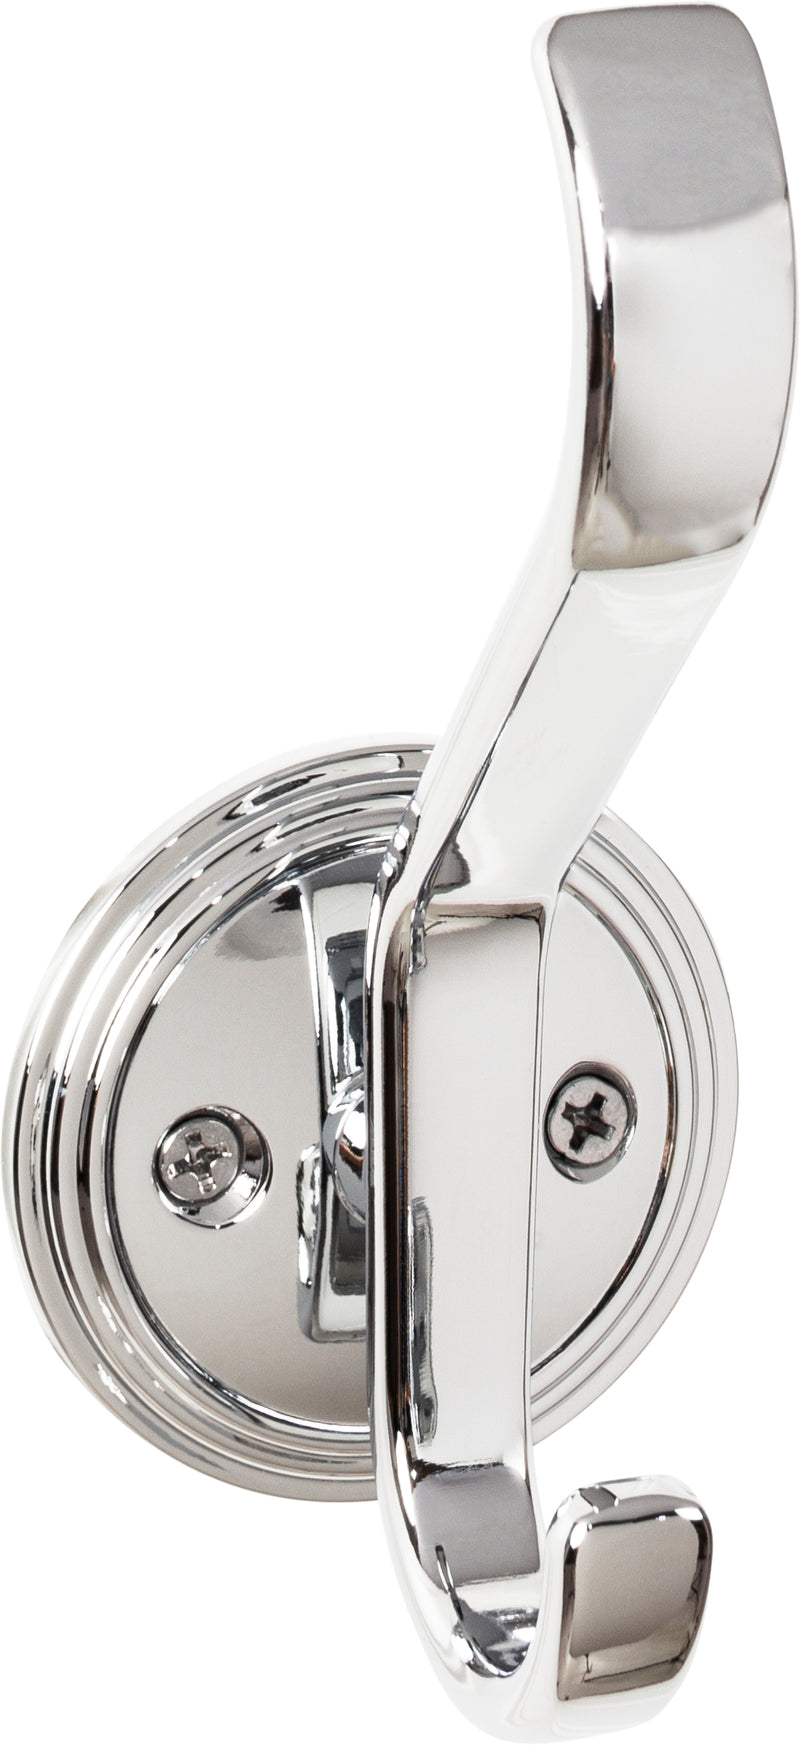 Top Knobs Reeded Hook 4 11/16 Inch - Stellar Hardware and Bath 